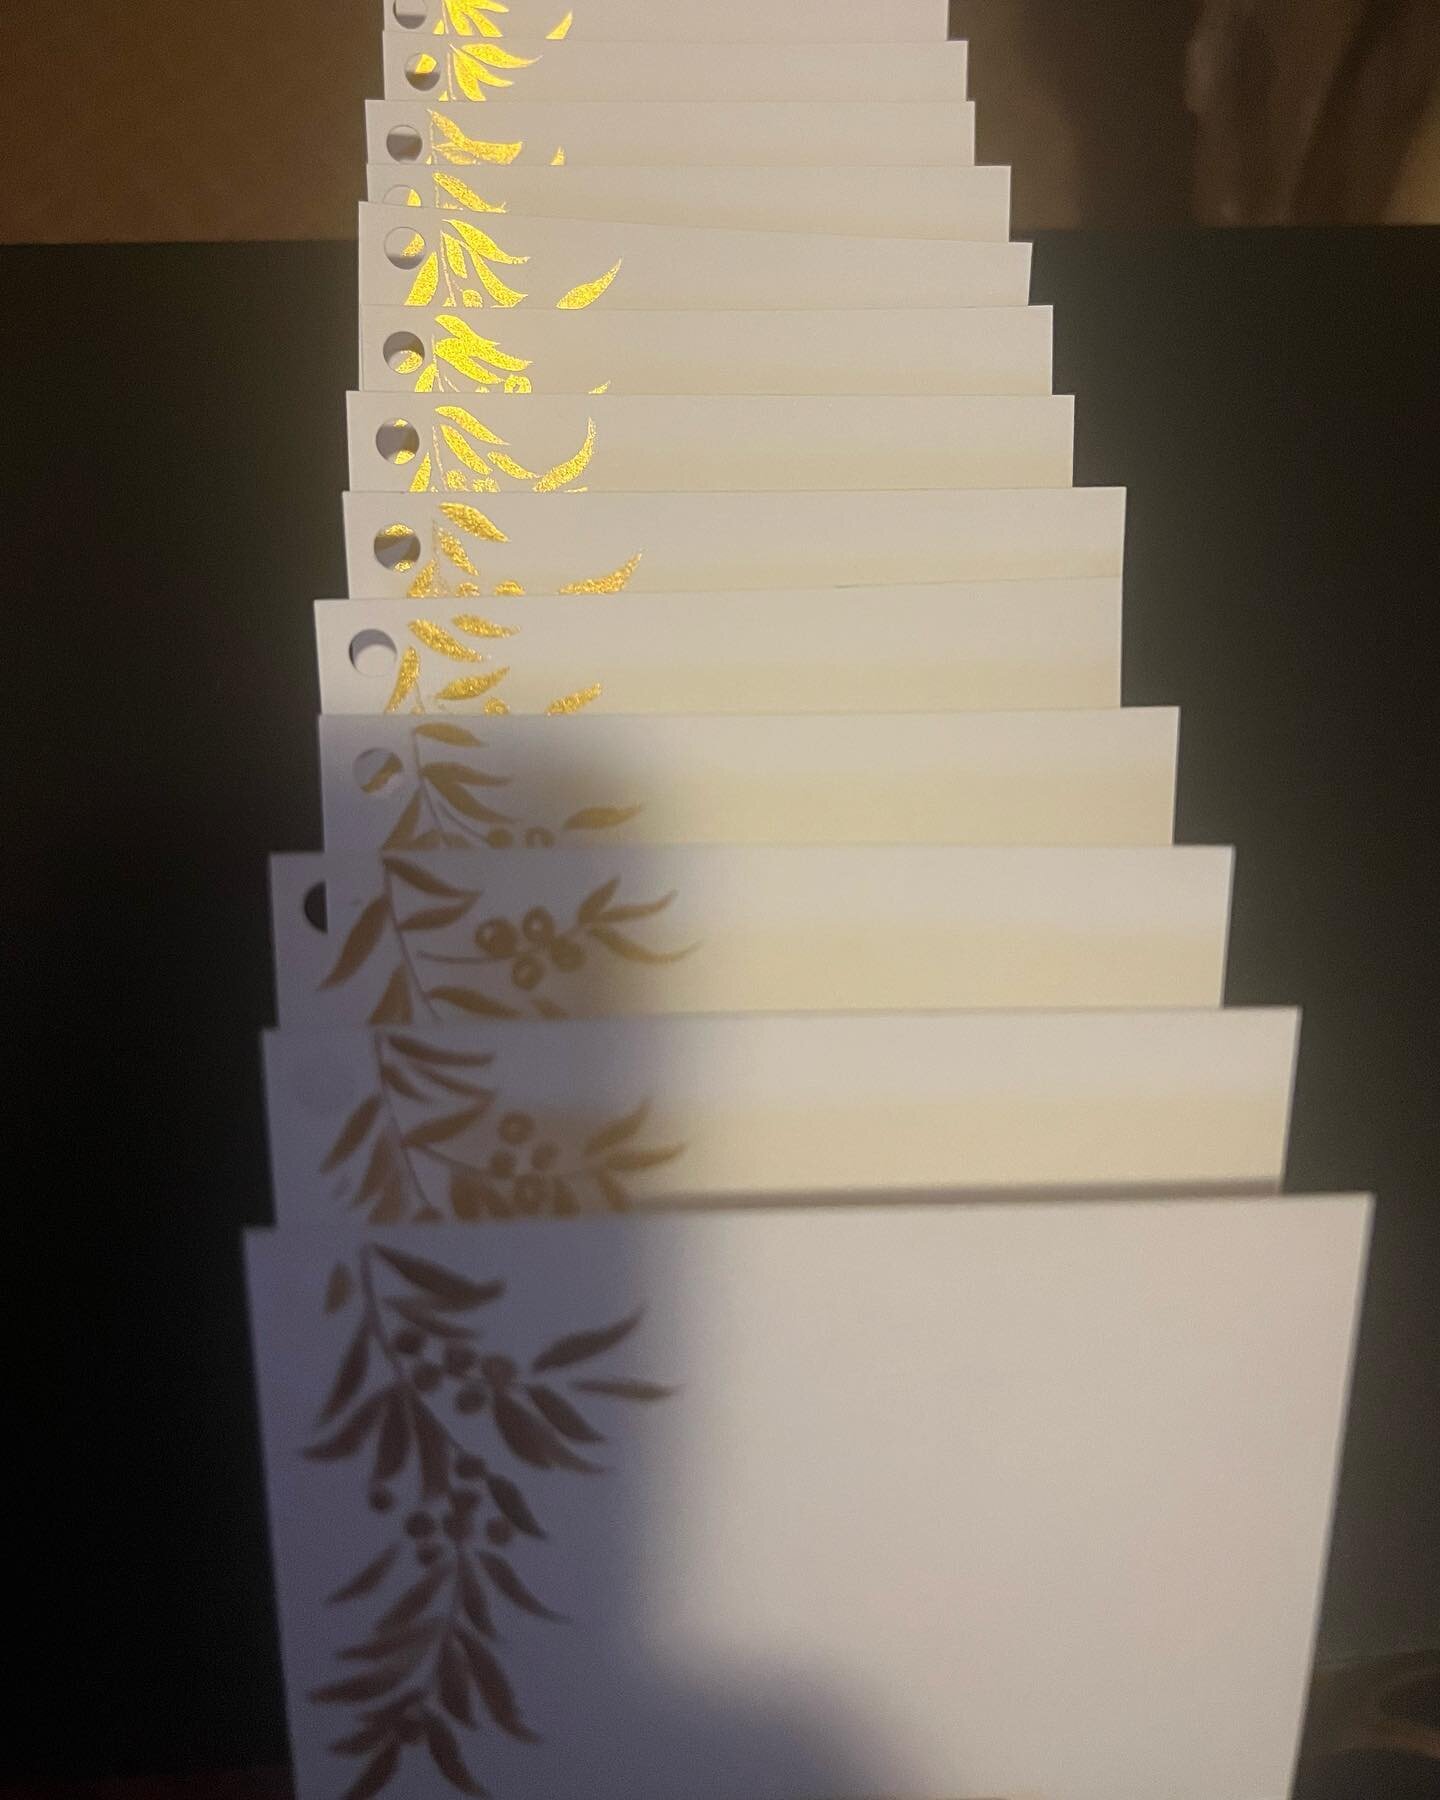 First batch of watercolor gift tags ready for names and ribbon at my upcoming on-site job on Saturday. 
Nib: round brush
Ink: Arabic gold 
Paper: custom cut Strathmore cardstock 
 #calligraphypen #calligraphylover #calligraphy #moderncalligraphy #cal